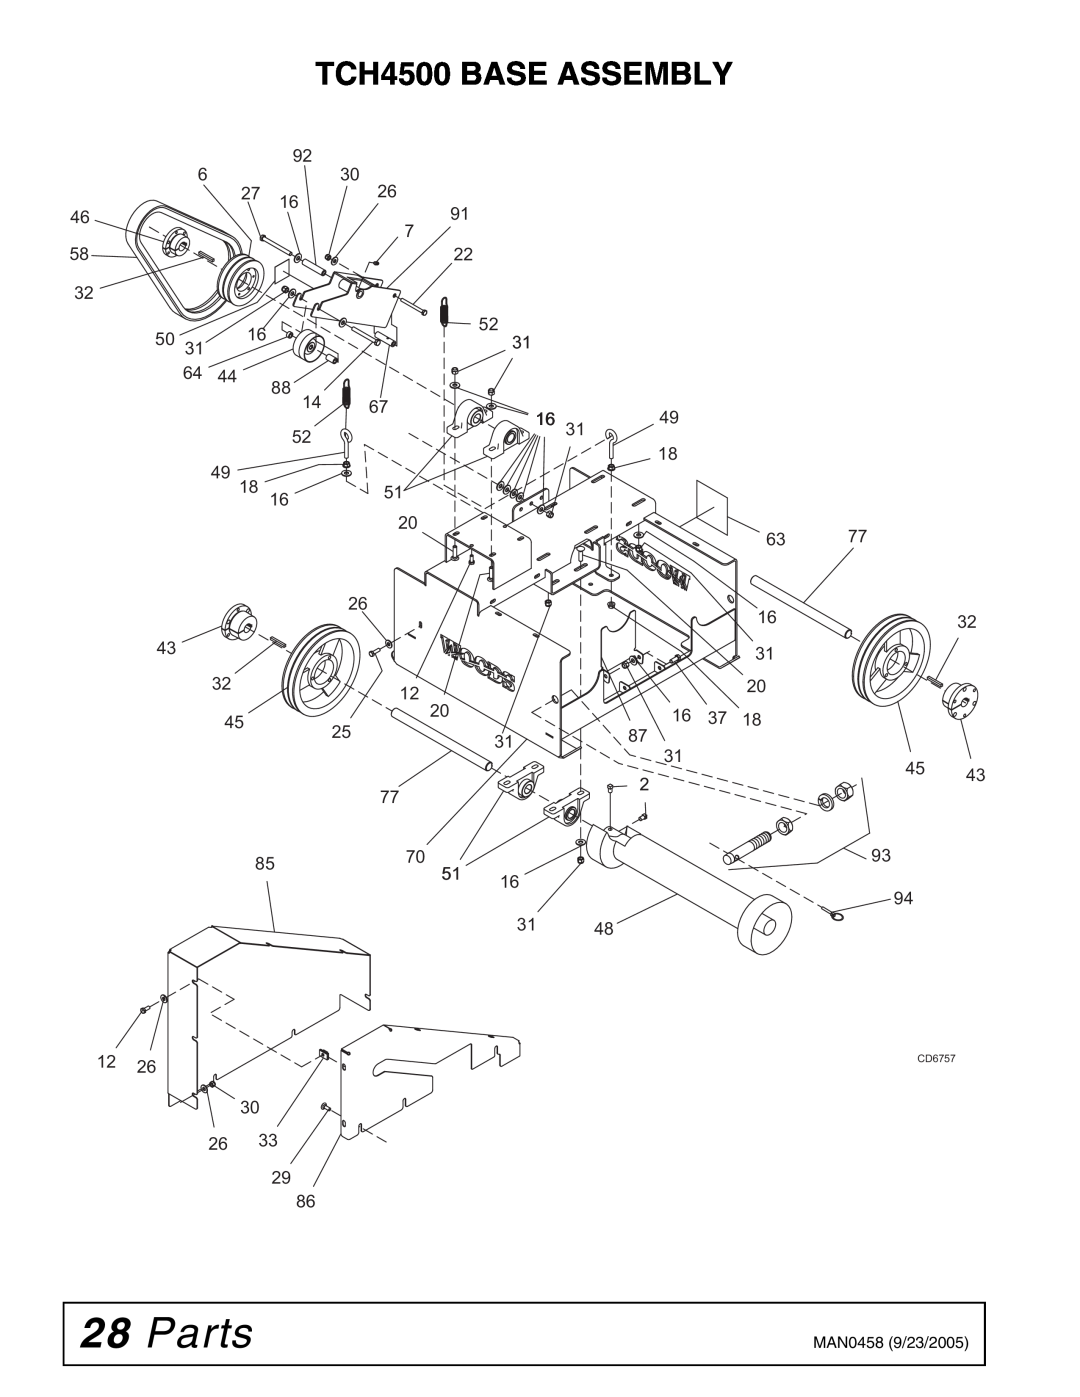 Woods Equipment manual Parts, TCH4500 BASE ASSEMBLY, MAN0458 9/23/2005, CD6757 